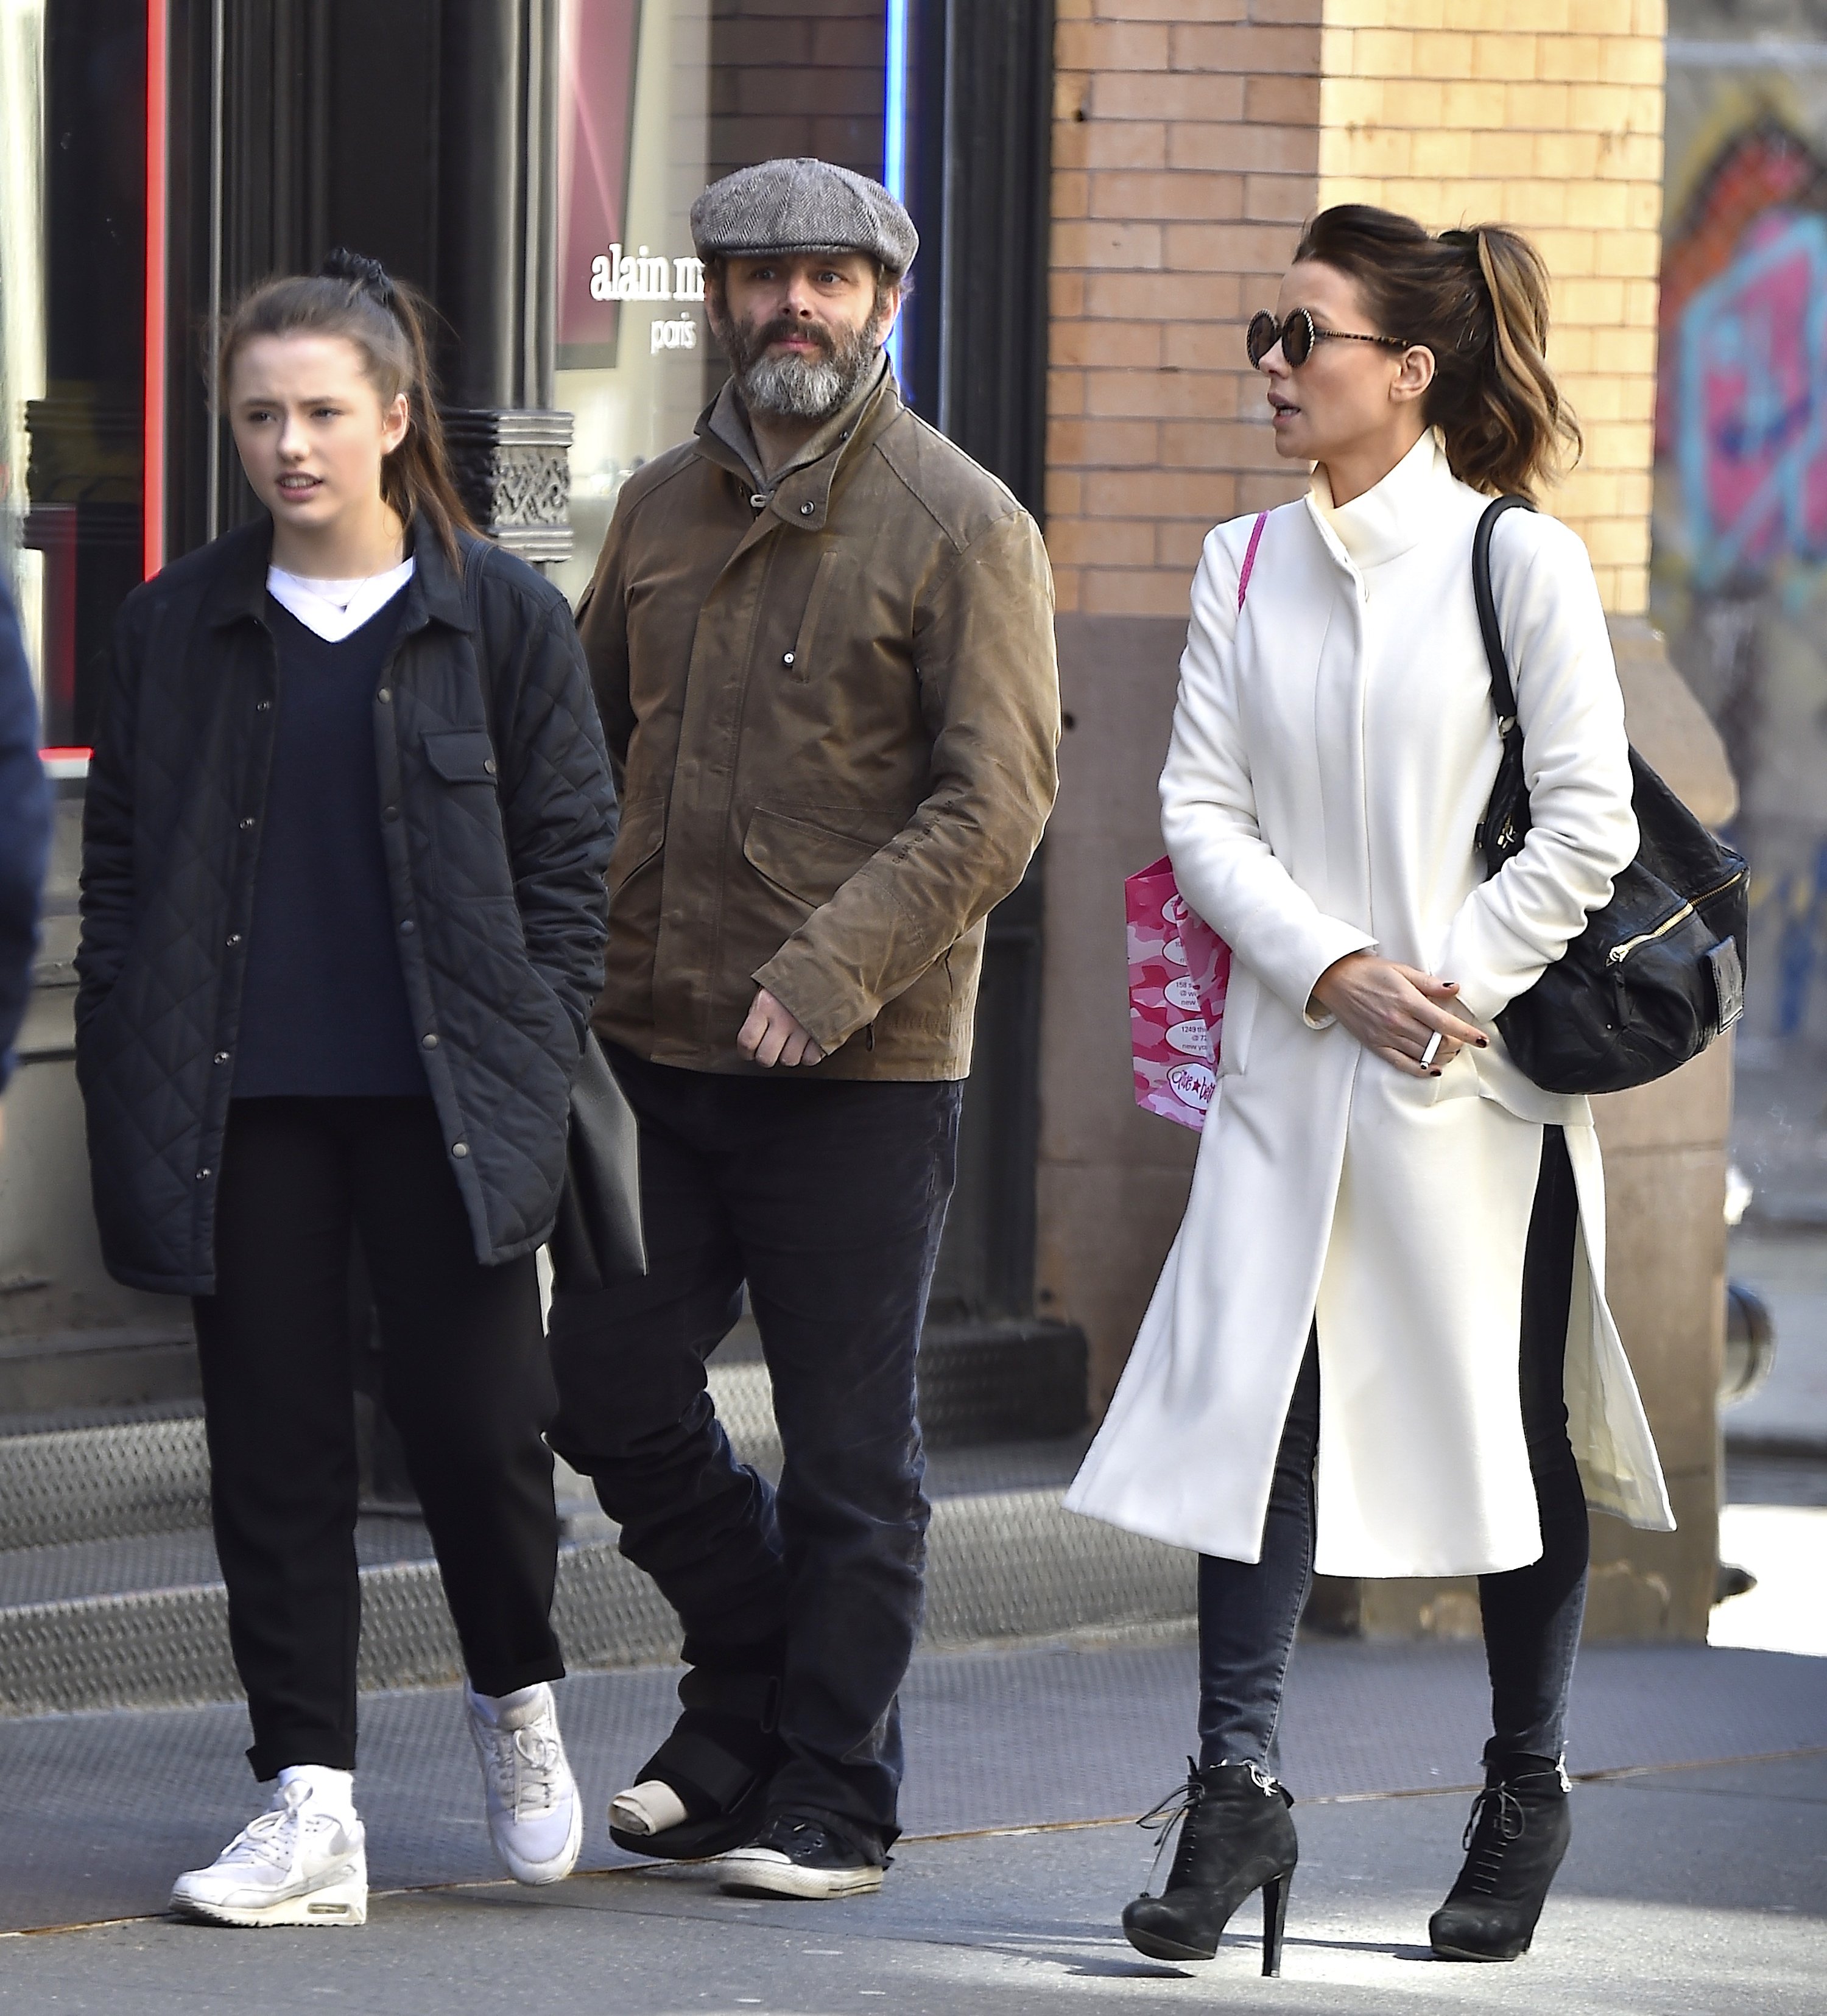 Kate Beckinsale, Lily Mo Sheen, and Michael Sheen are seen in Soho on April 5, 2016, in New York City. | Source: Getty Images